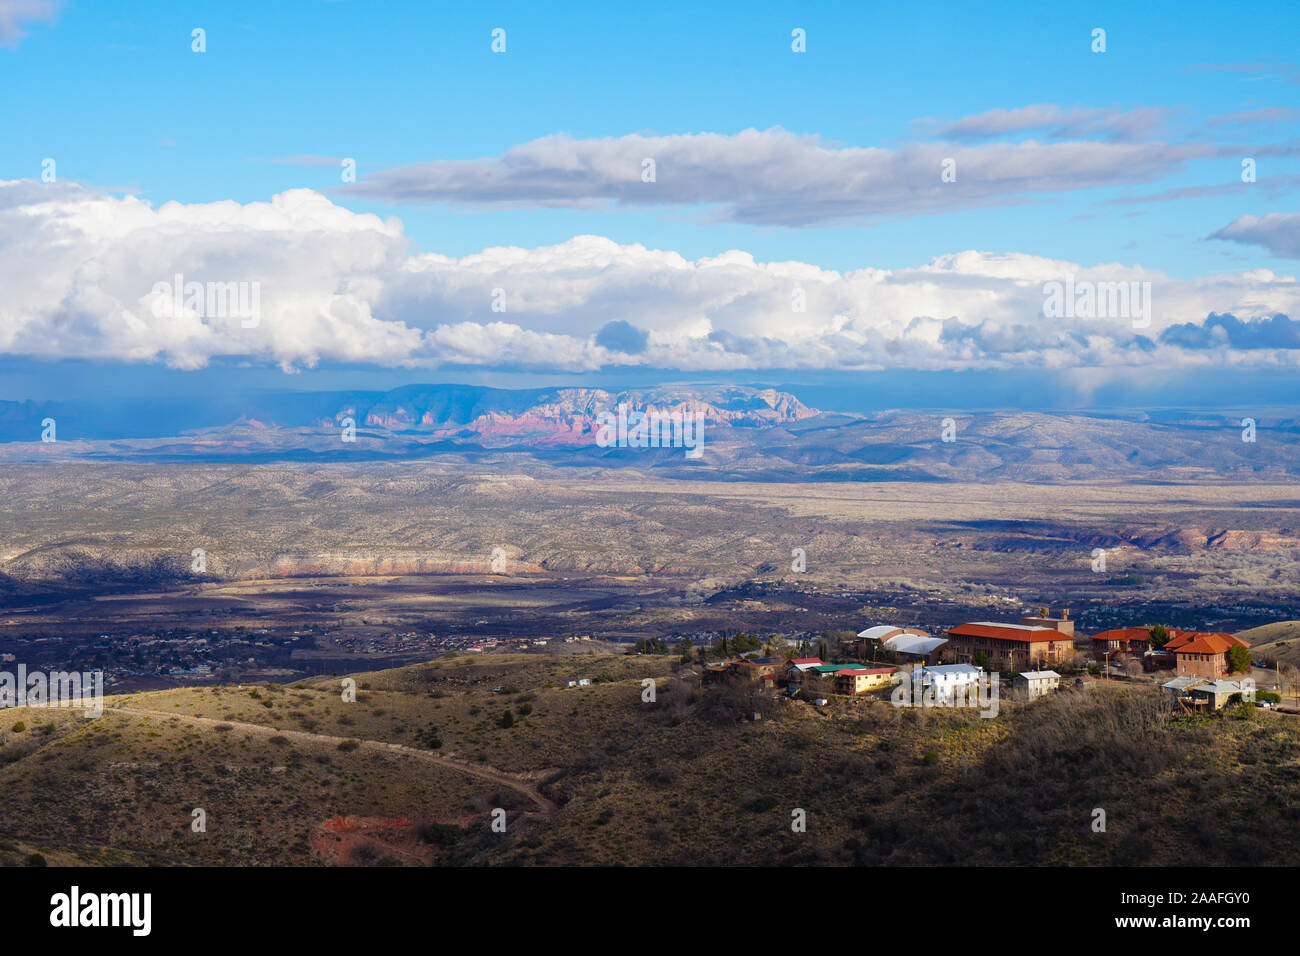 Looking down on the red rocks of Sedona and the beautiful Verde Valley from Jerome. Stock Photo